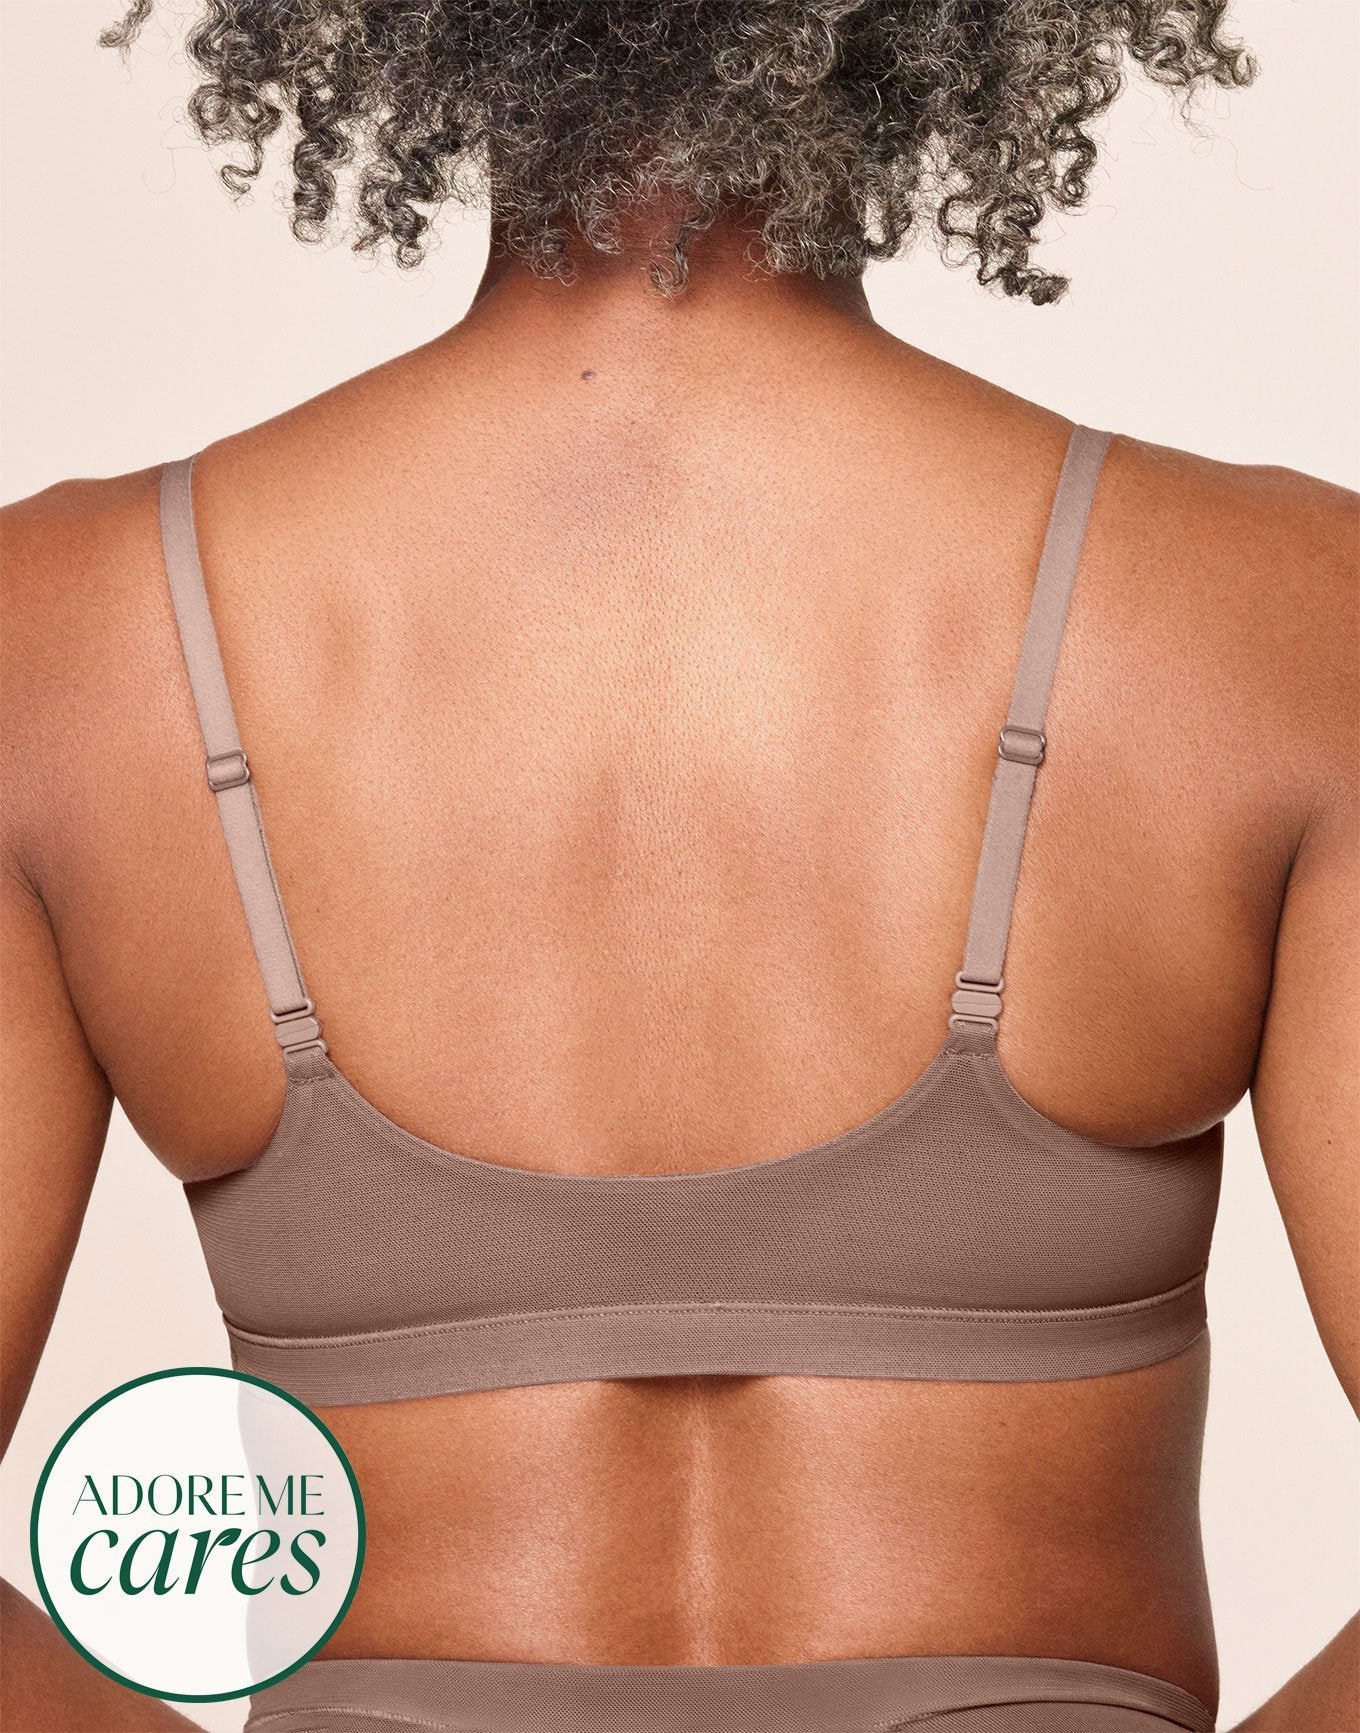 nueskin Olympia Mesh Scoop-Neck Shelf Bra in color Deep Taupe and shape bralette